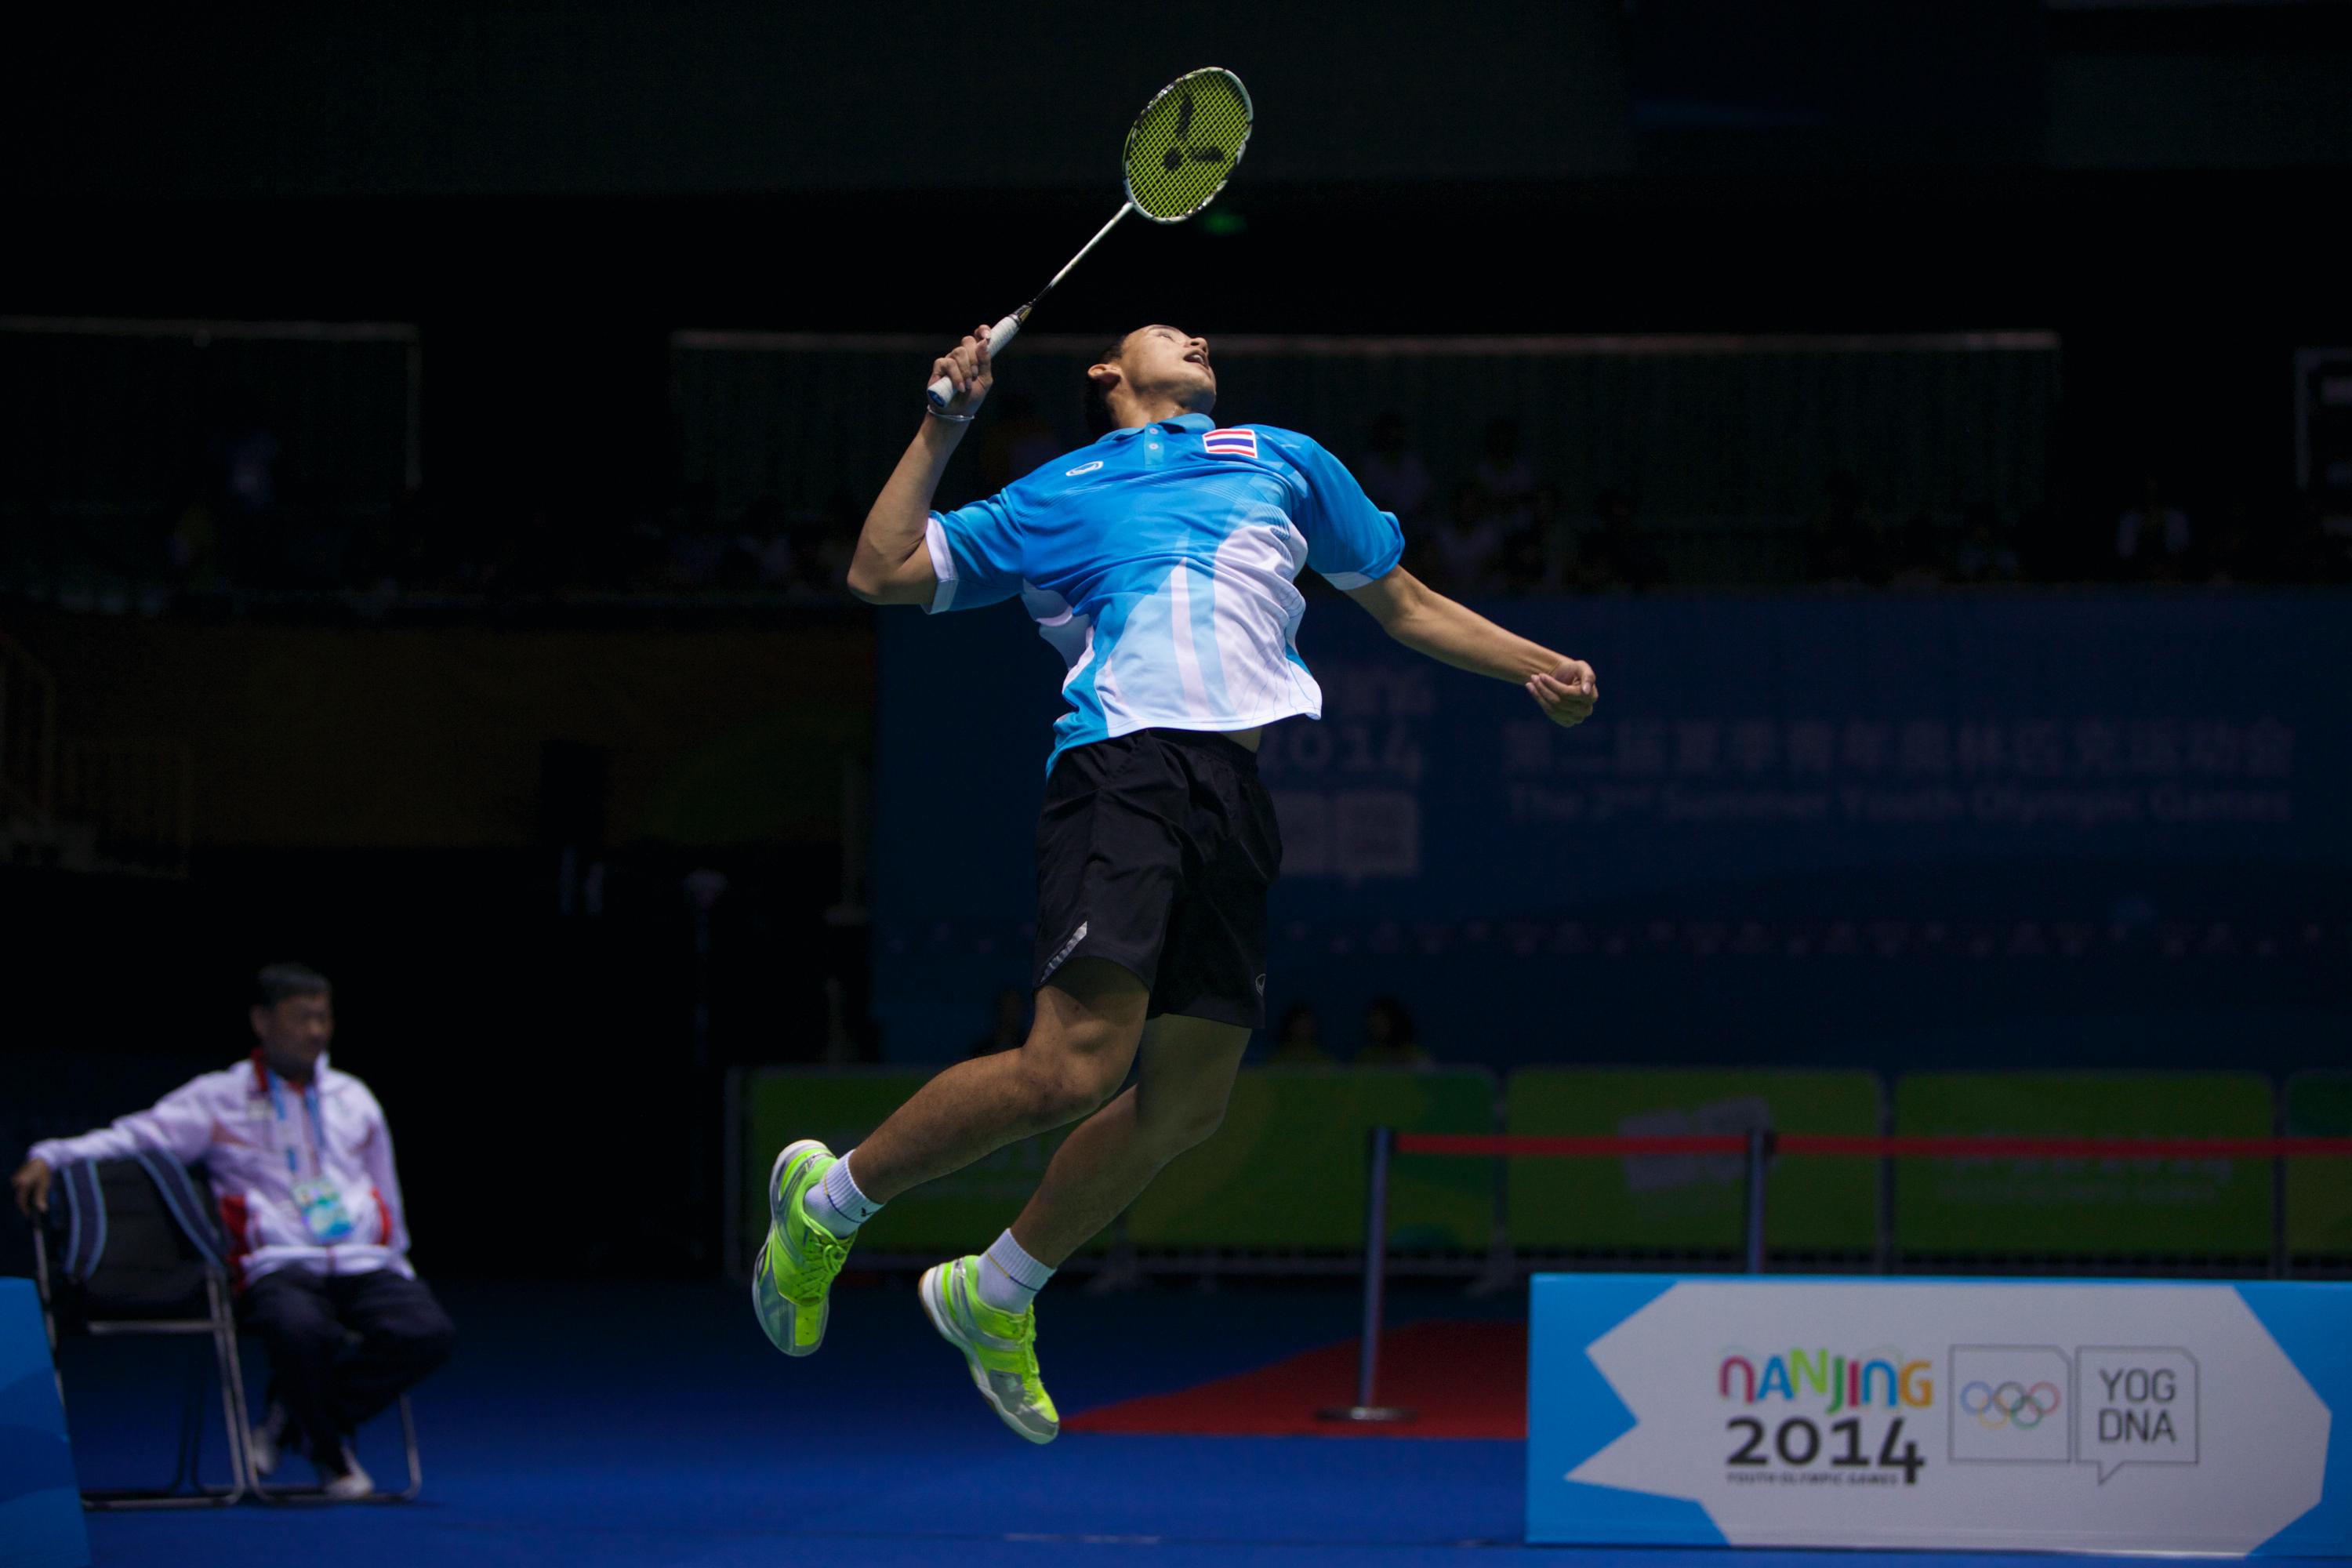 The most common injuries in badminton